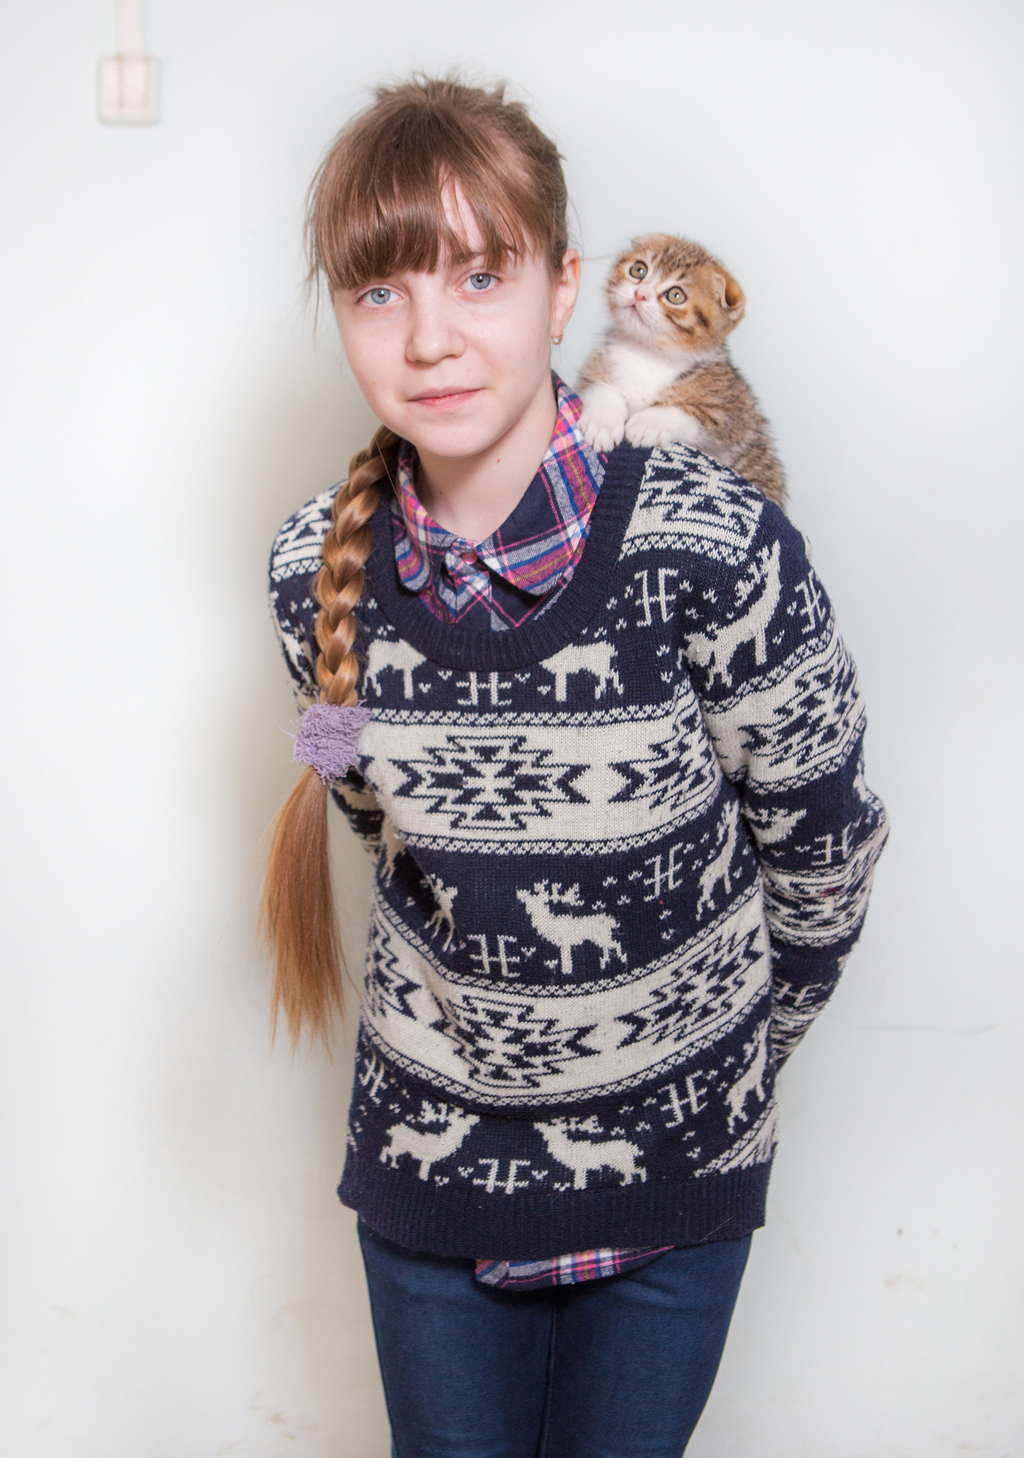 13 Gorgeous Pictures Of Russians Posing With Their Cats